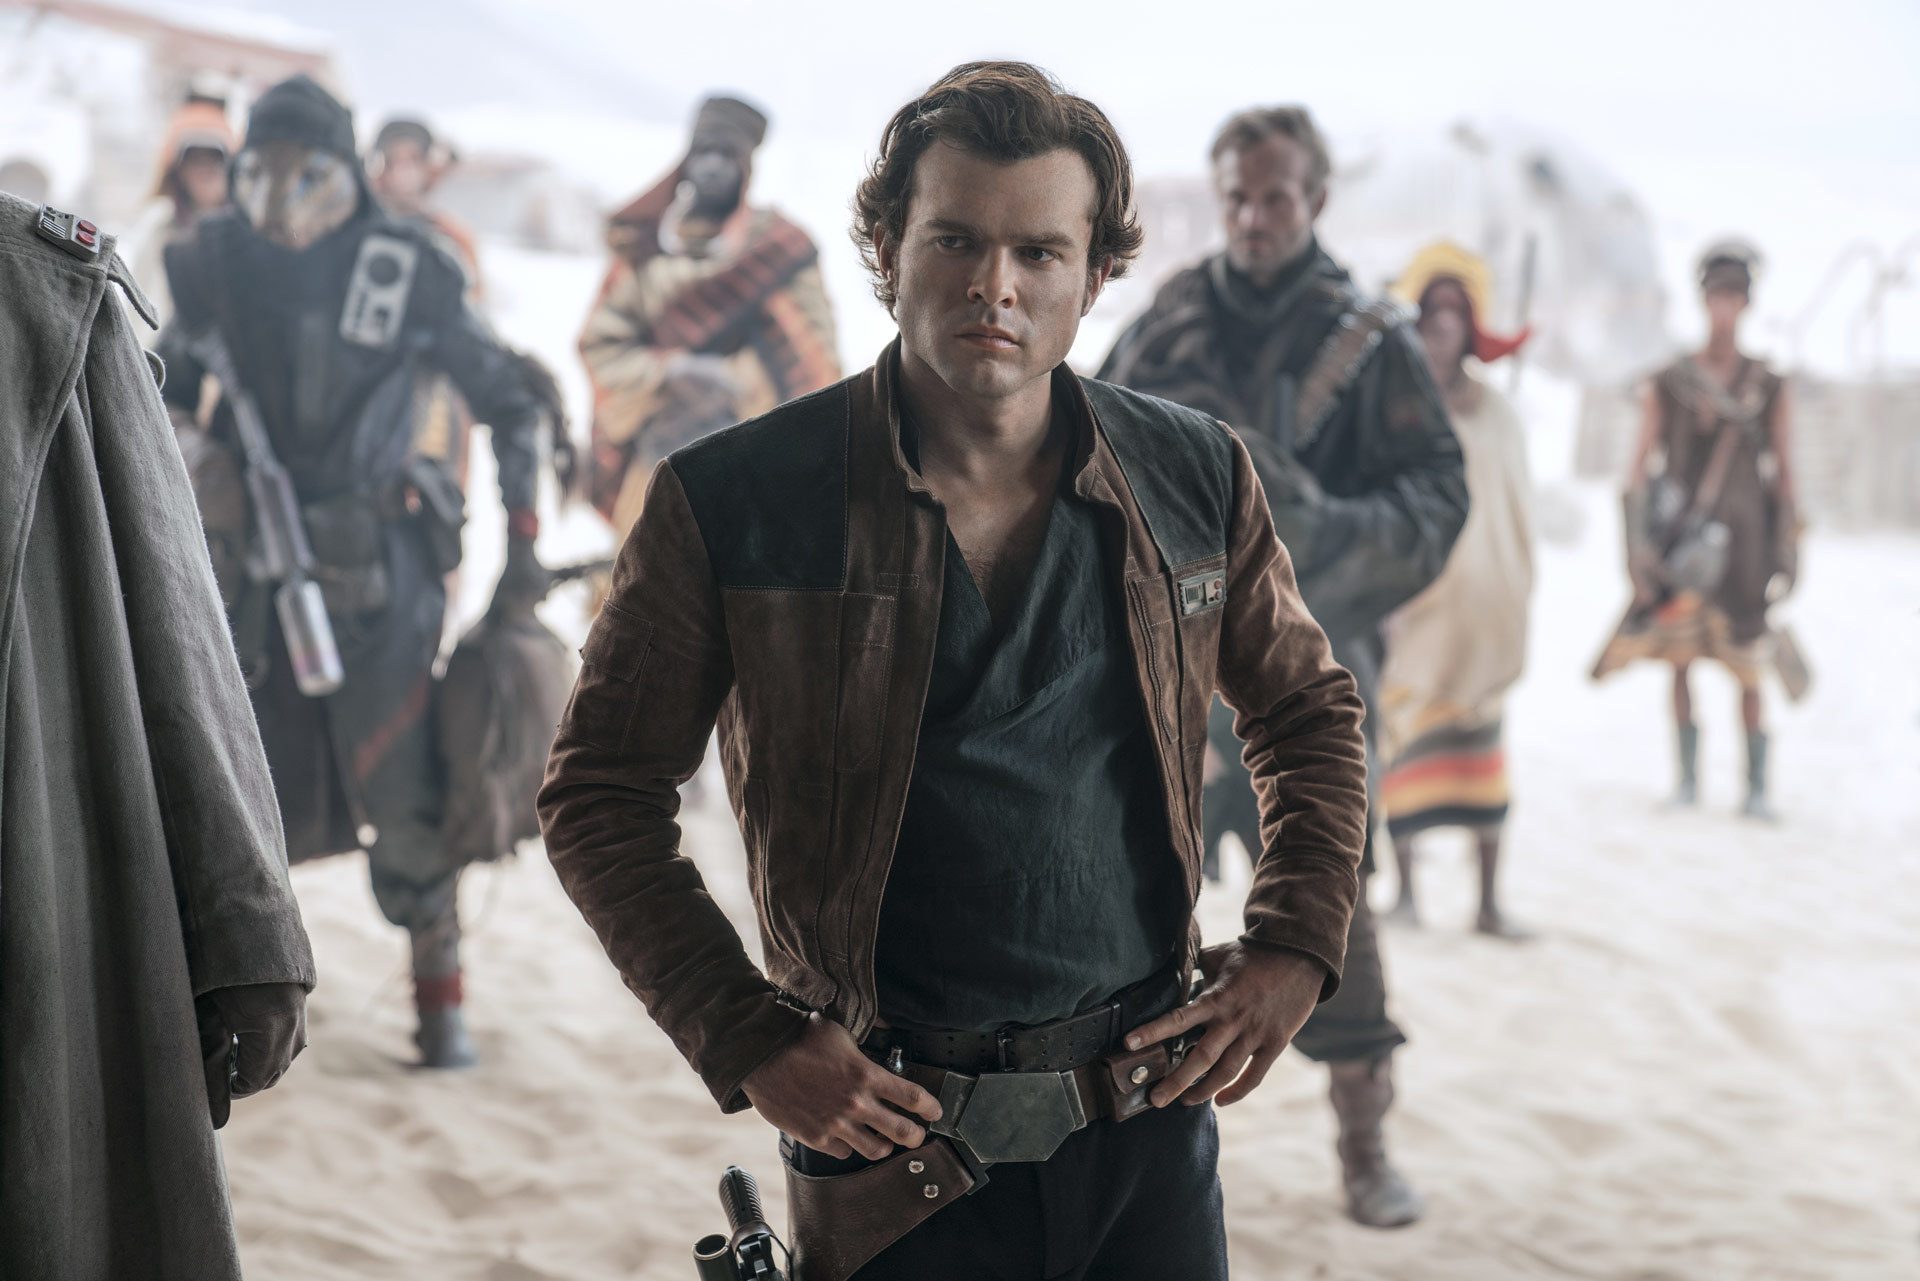 ‘Solo: A Star Wars Story’ review: Enjoyable romp